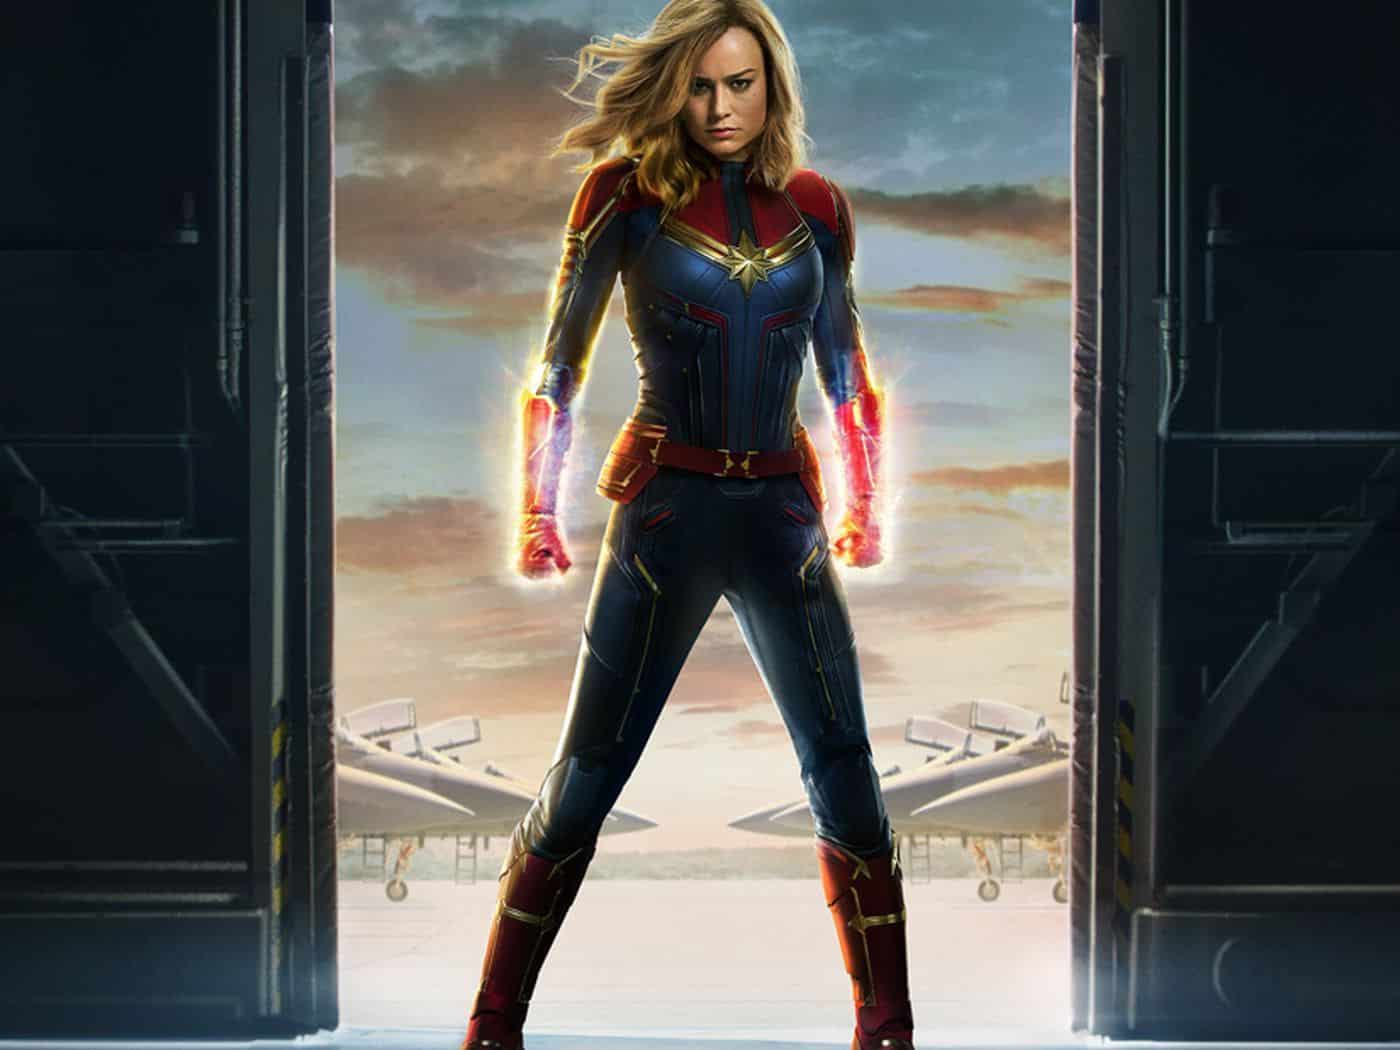 brie-larson-as-captain-marvel-in-phase-3-of-the-marvel-cinematic-universe